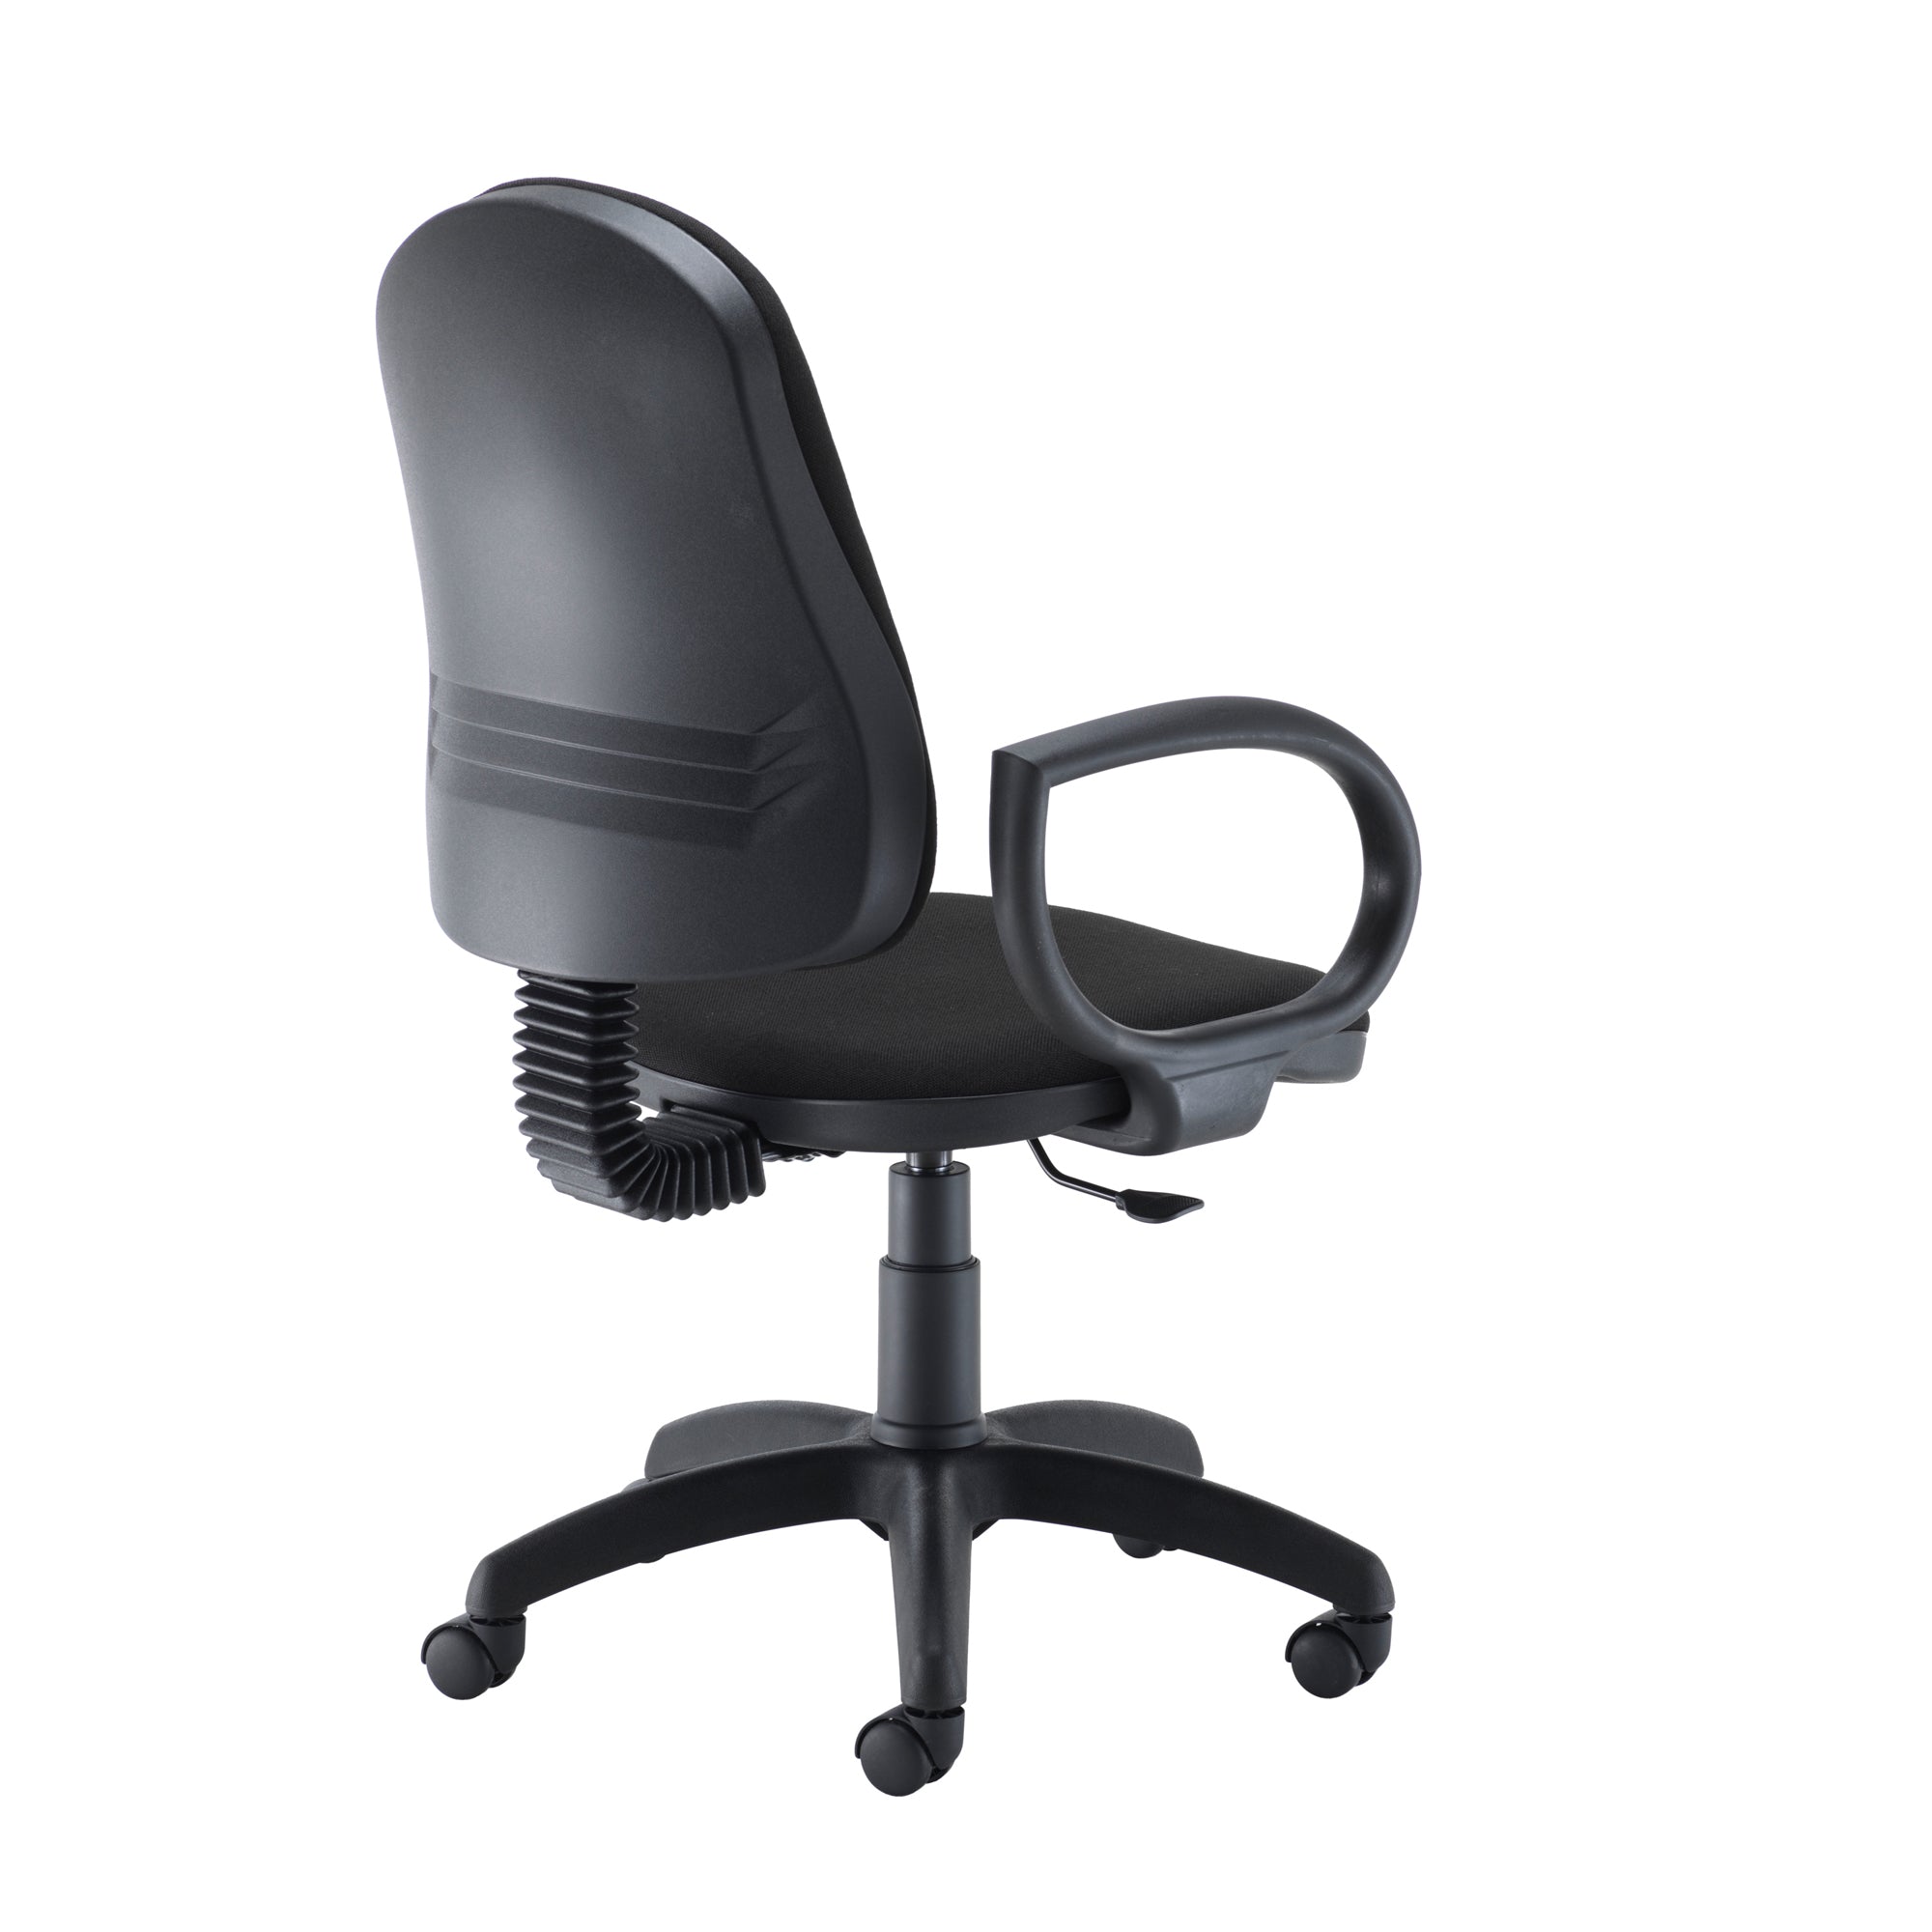 Calypso 2 Single Lever Fixed Back Chair